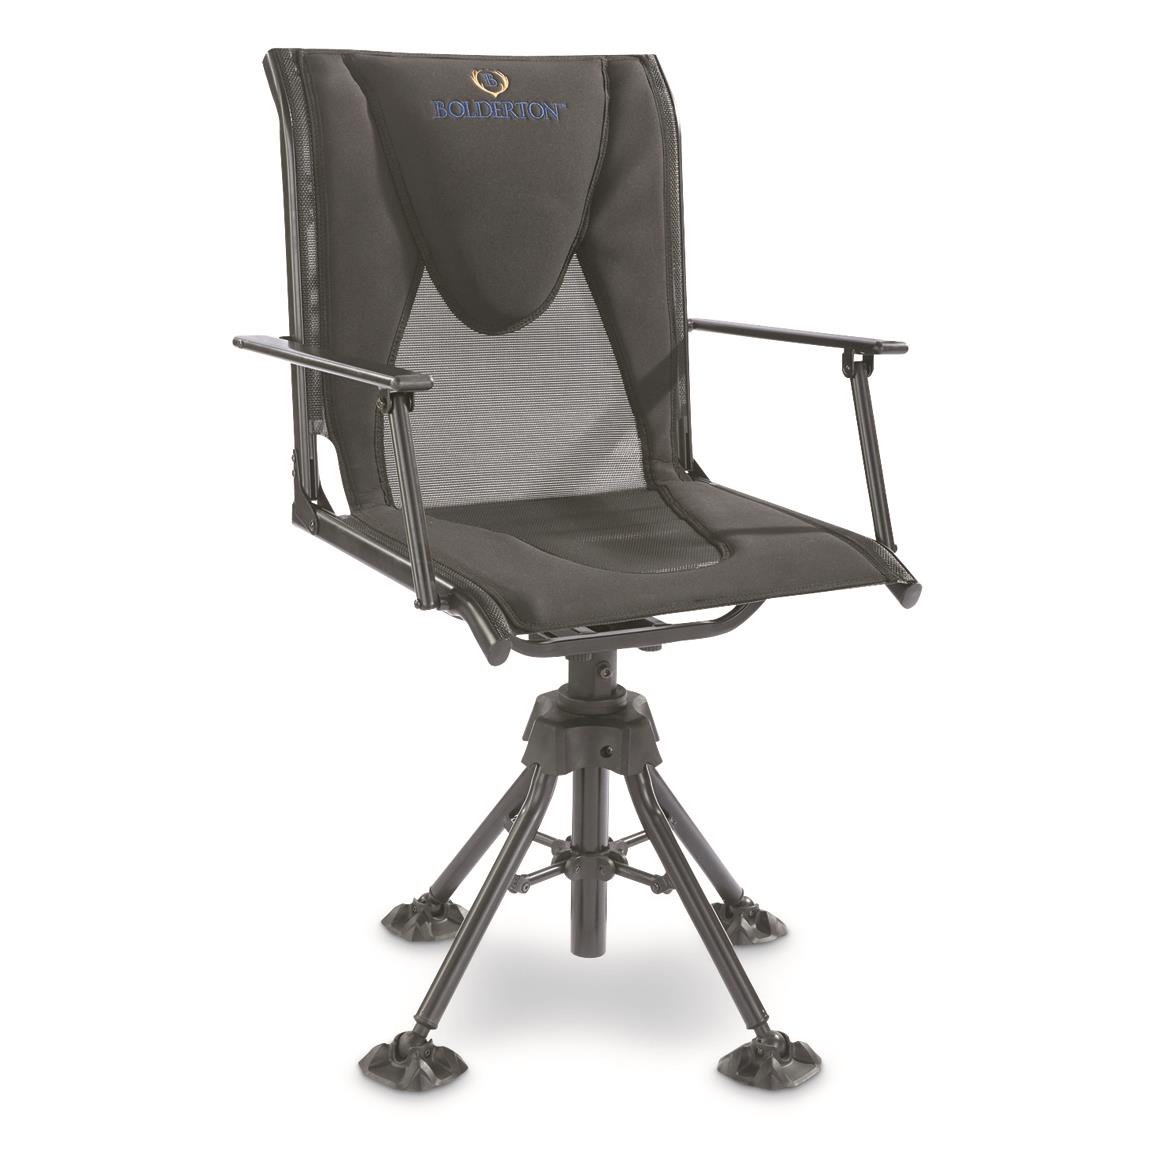 Bolderton 360 Comfort Swivel Blind Chair with Armrests - 697303, Stools, Chairs & Seat Cushions at Sportsman's Guide